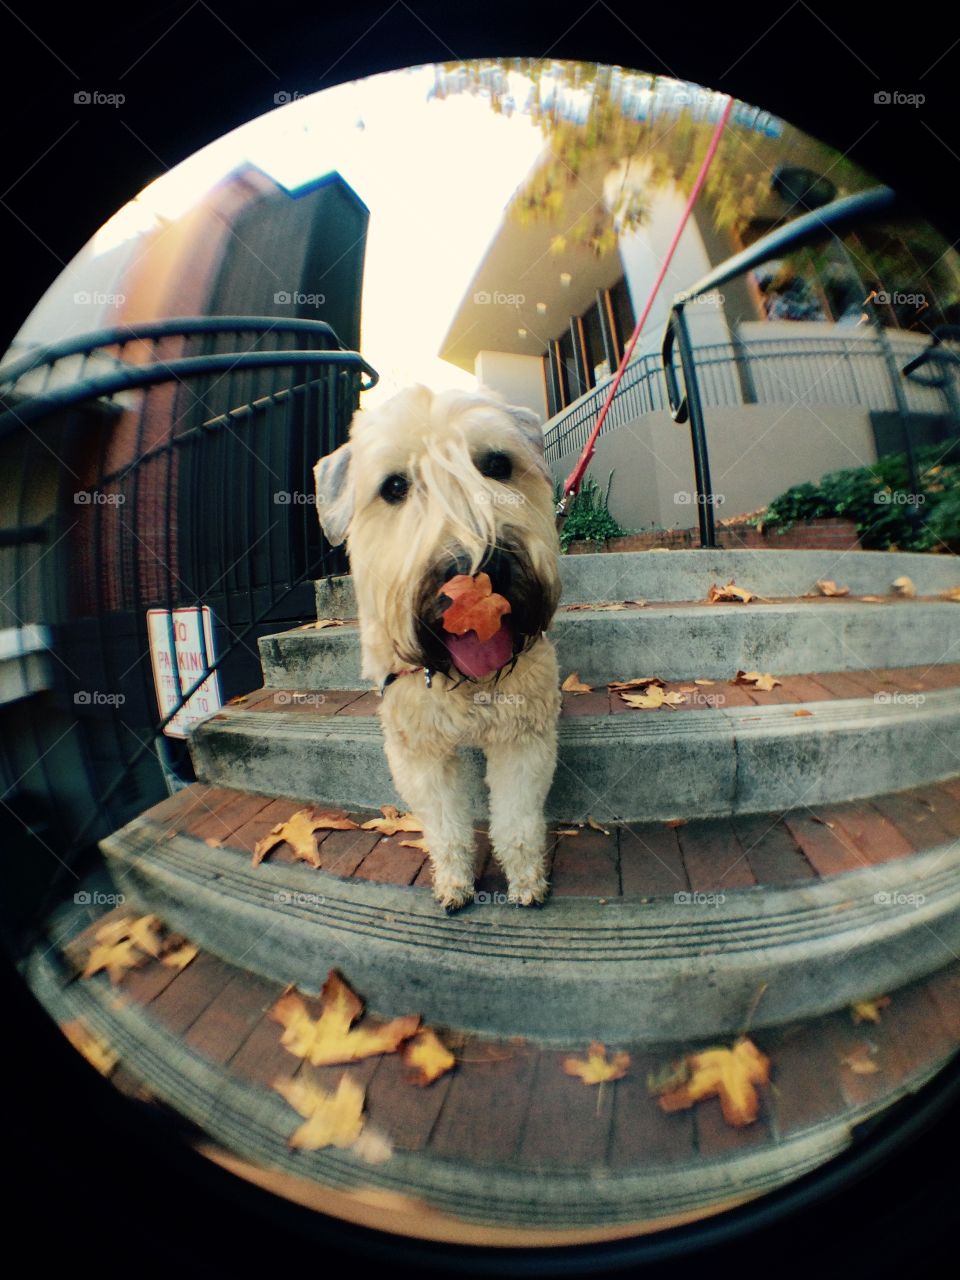  Downtown Walks in Fall. Chloe's curious nature got a leaf stuck to her nose on a walk through downtown Ashland Oregon 